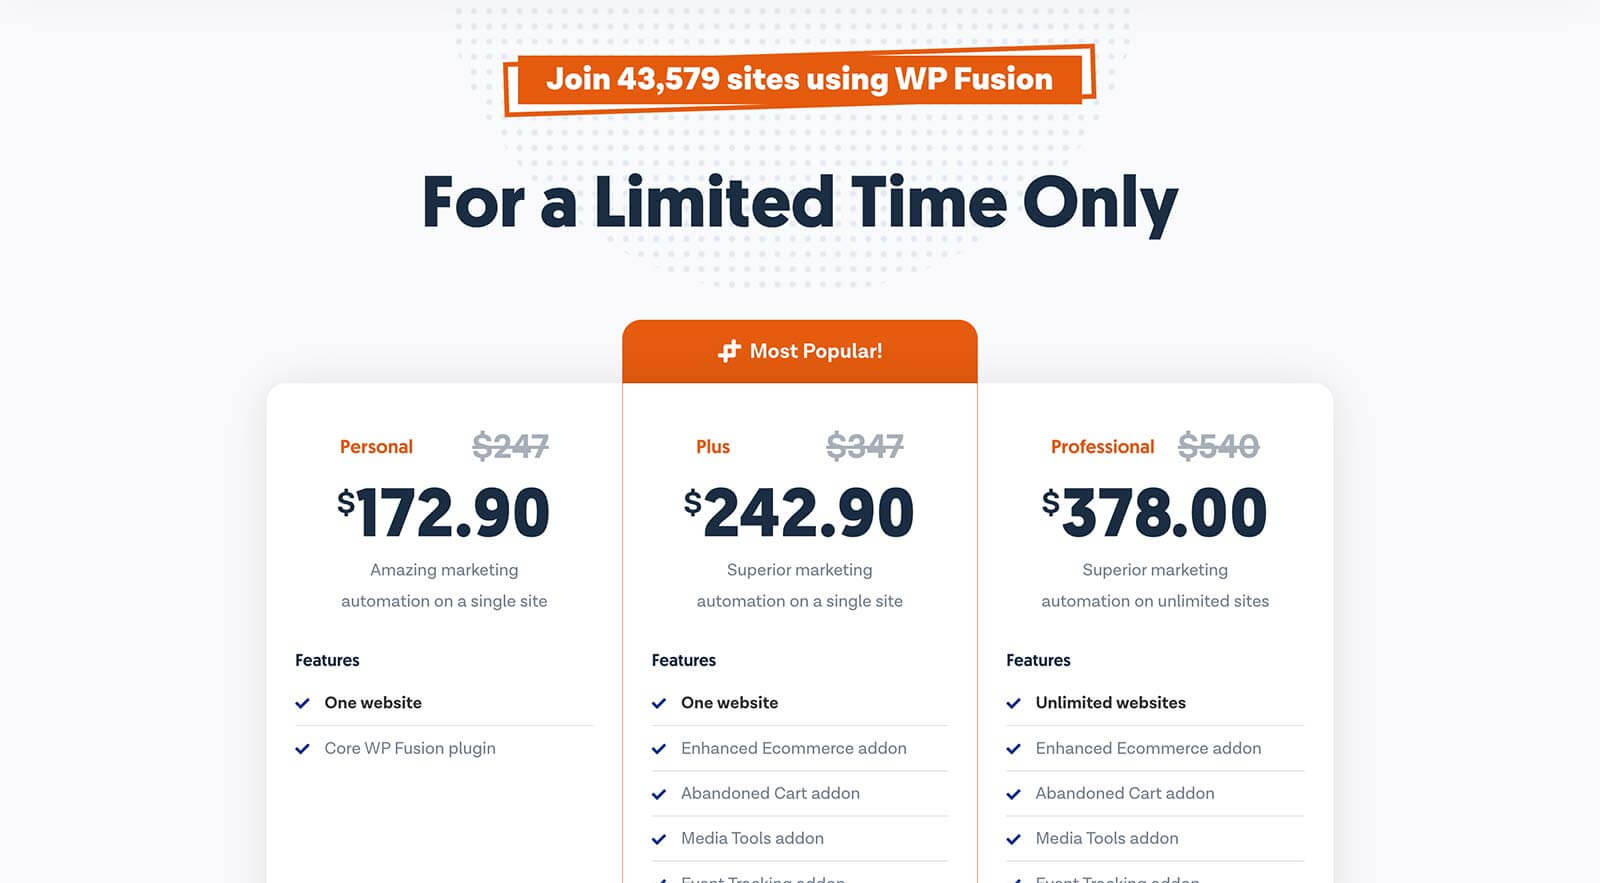 WP Fusion Pricing Page